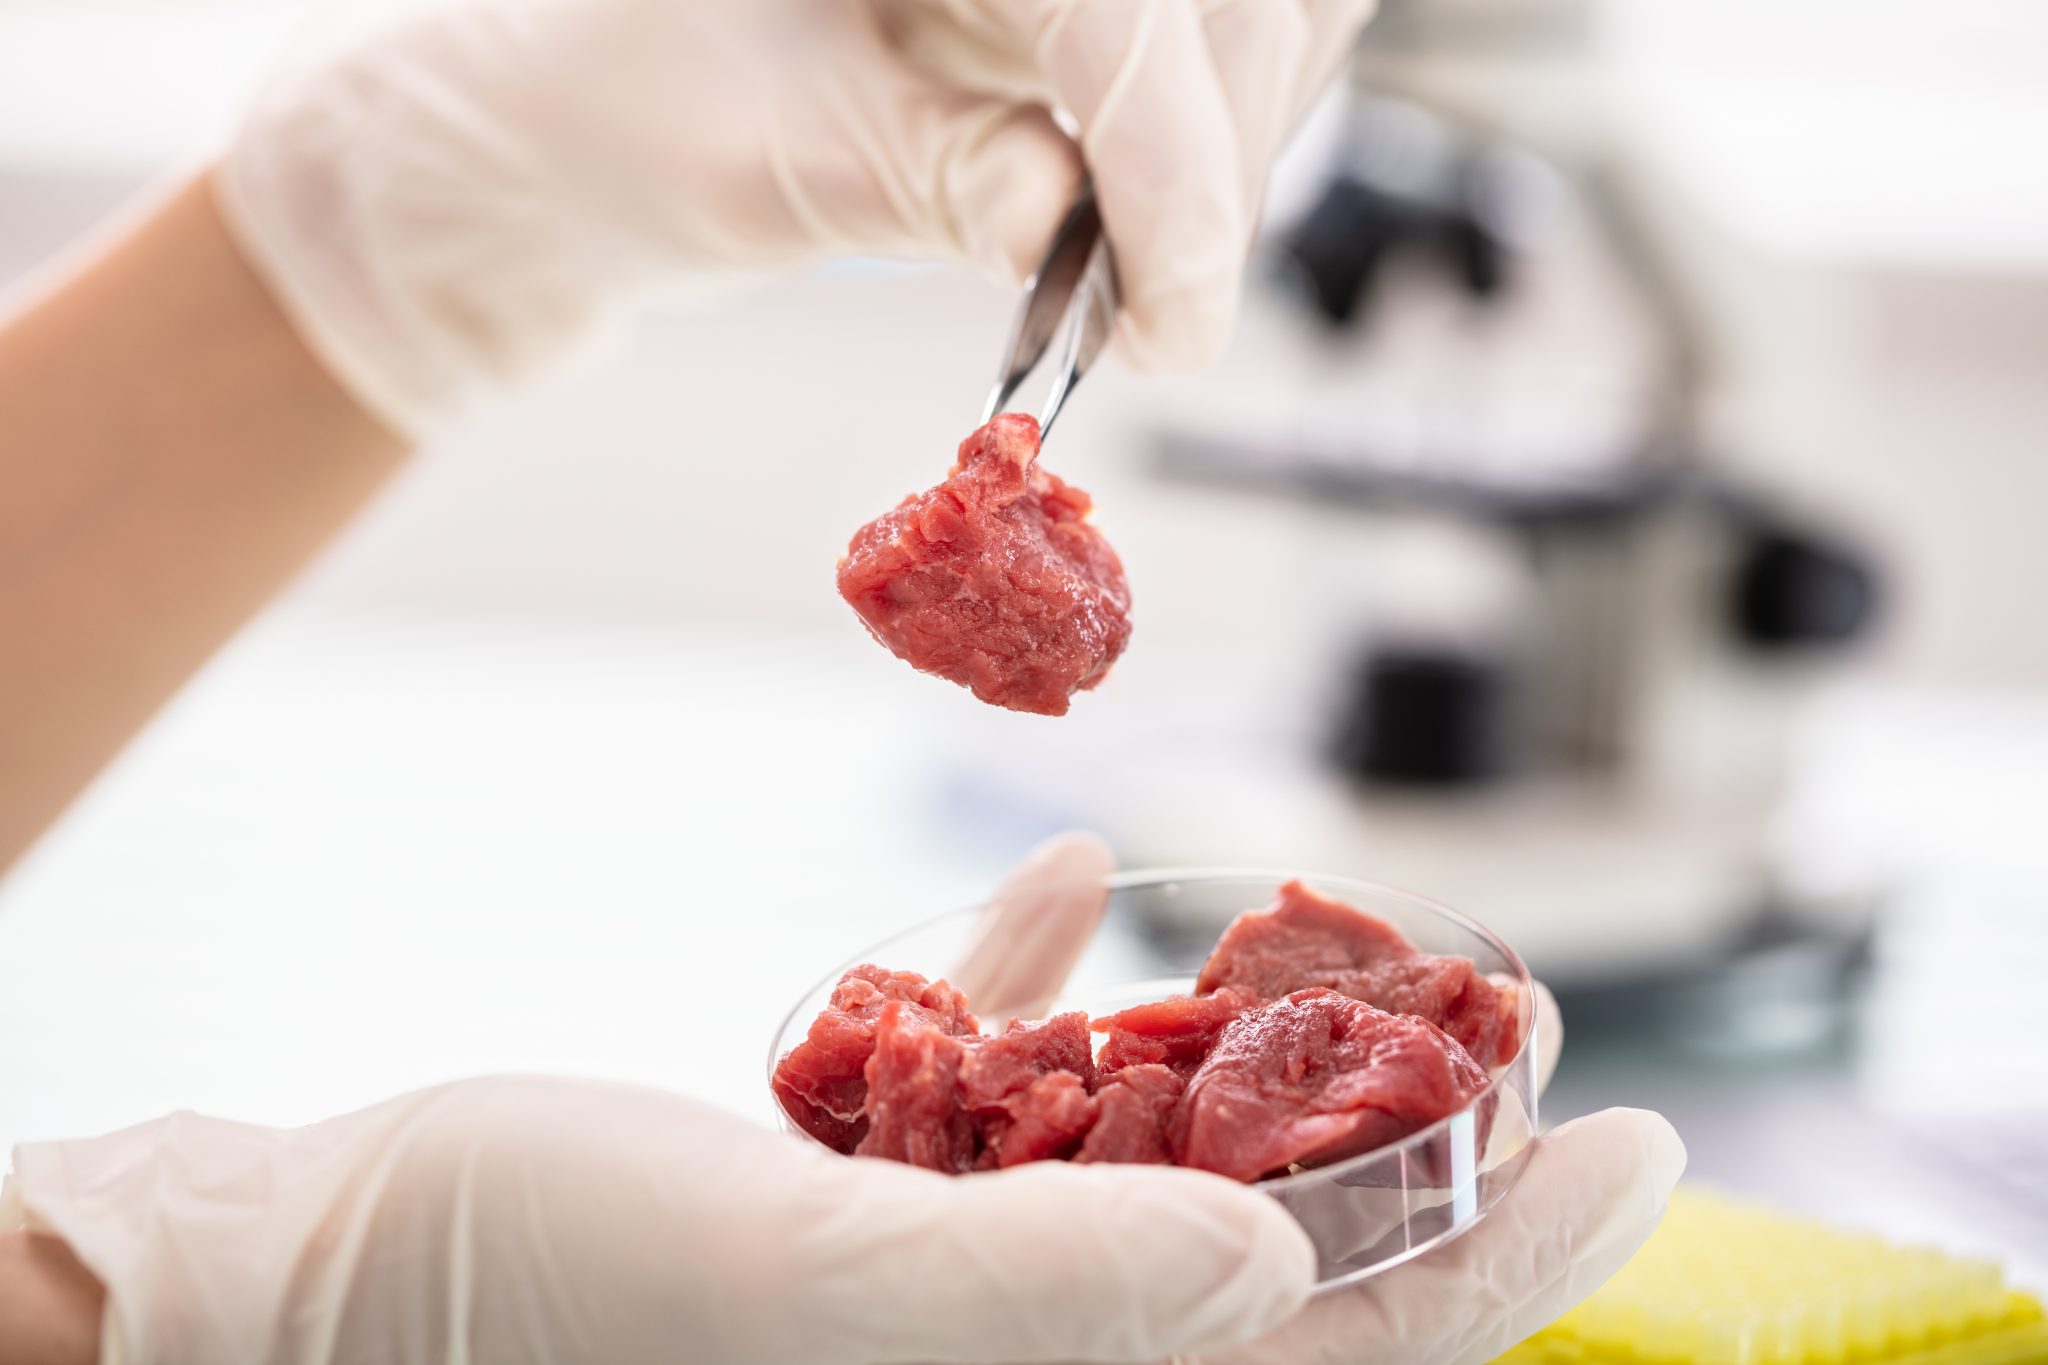  Lab Grown Meat To Hit U.S. in 2022, Backed By FDA & USDA, Along with “Smarter Food Safety Blueprint” and Traceability All Underway